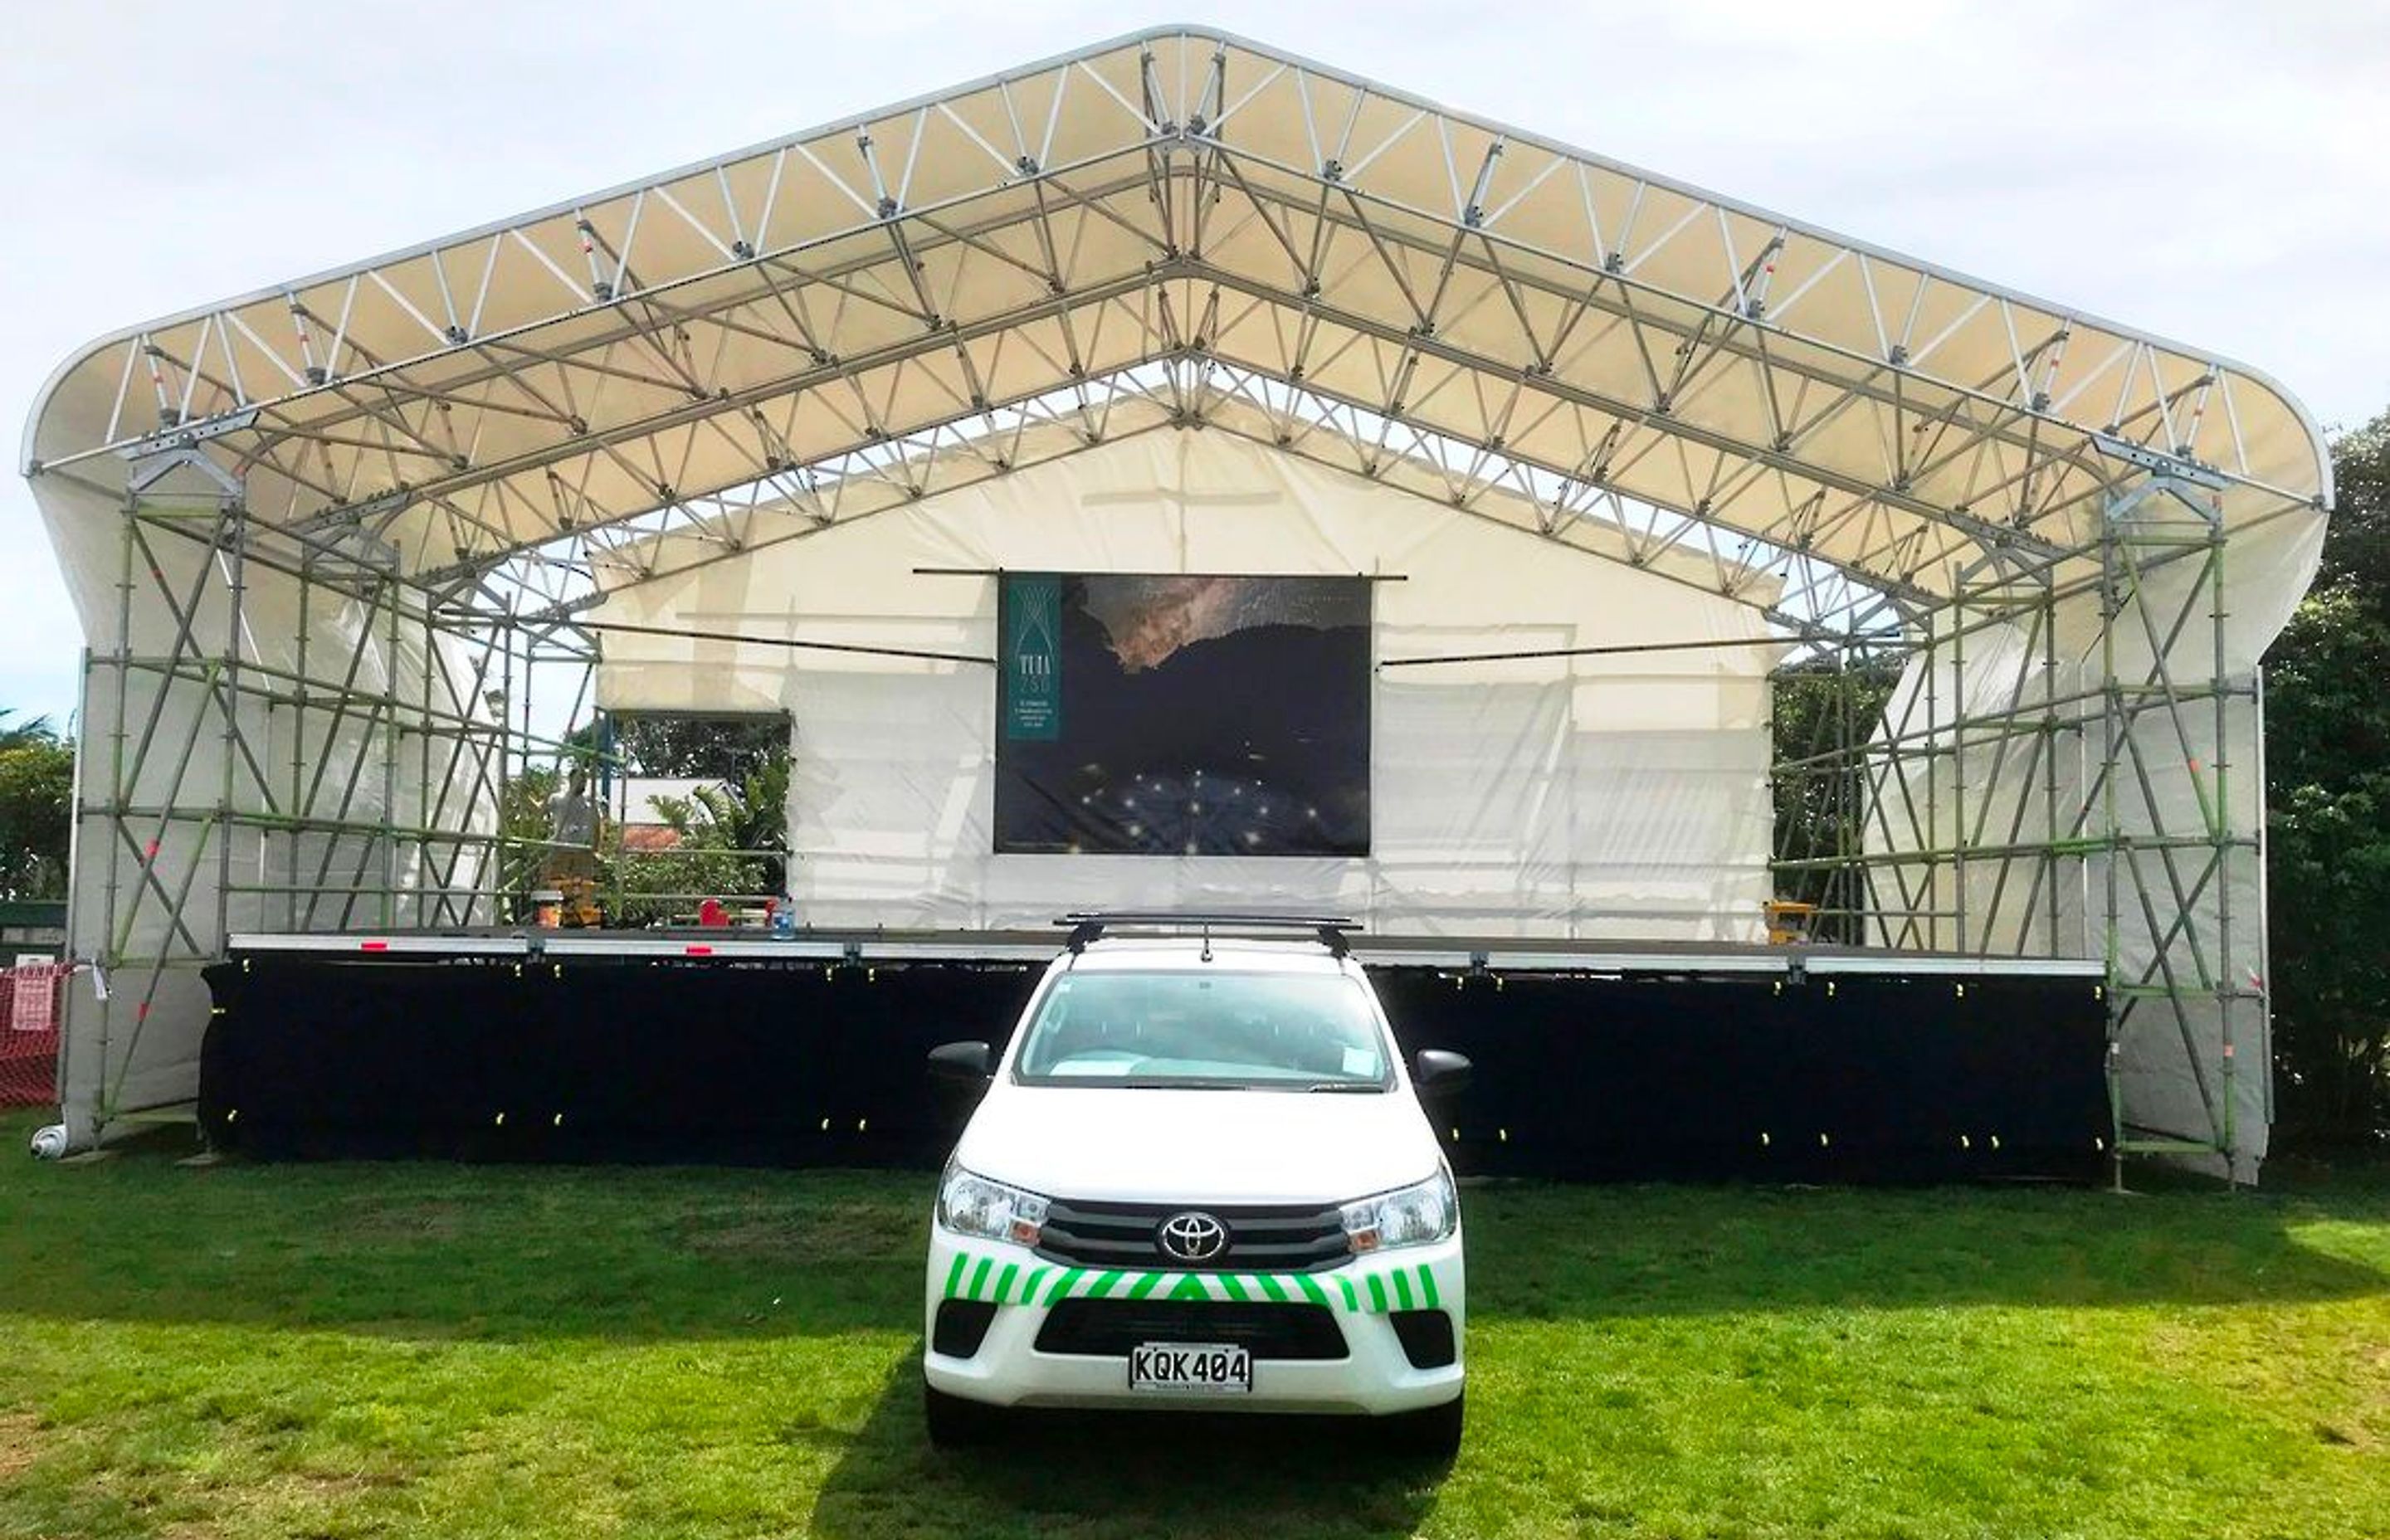 When using the Layher Keder Roof System with a Layher Staging System, you can create a covered stage as shown below. Erected in modules of 2.5m x 2m, total stage area of 240m² can be built. The stage decks are constructed from engineered aluminium framing